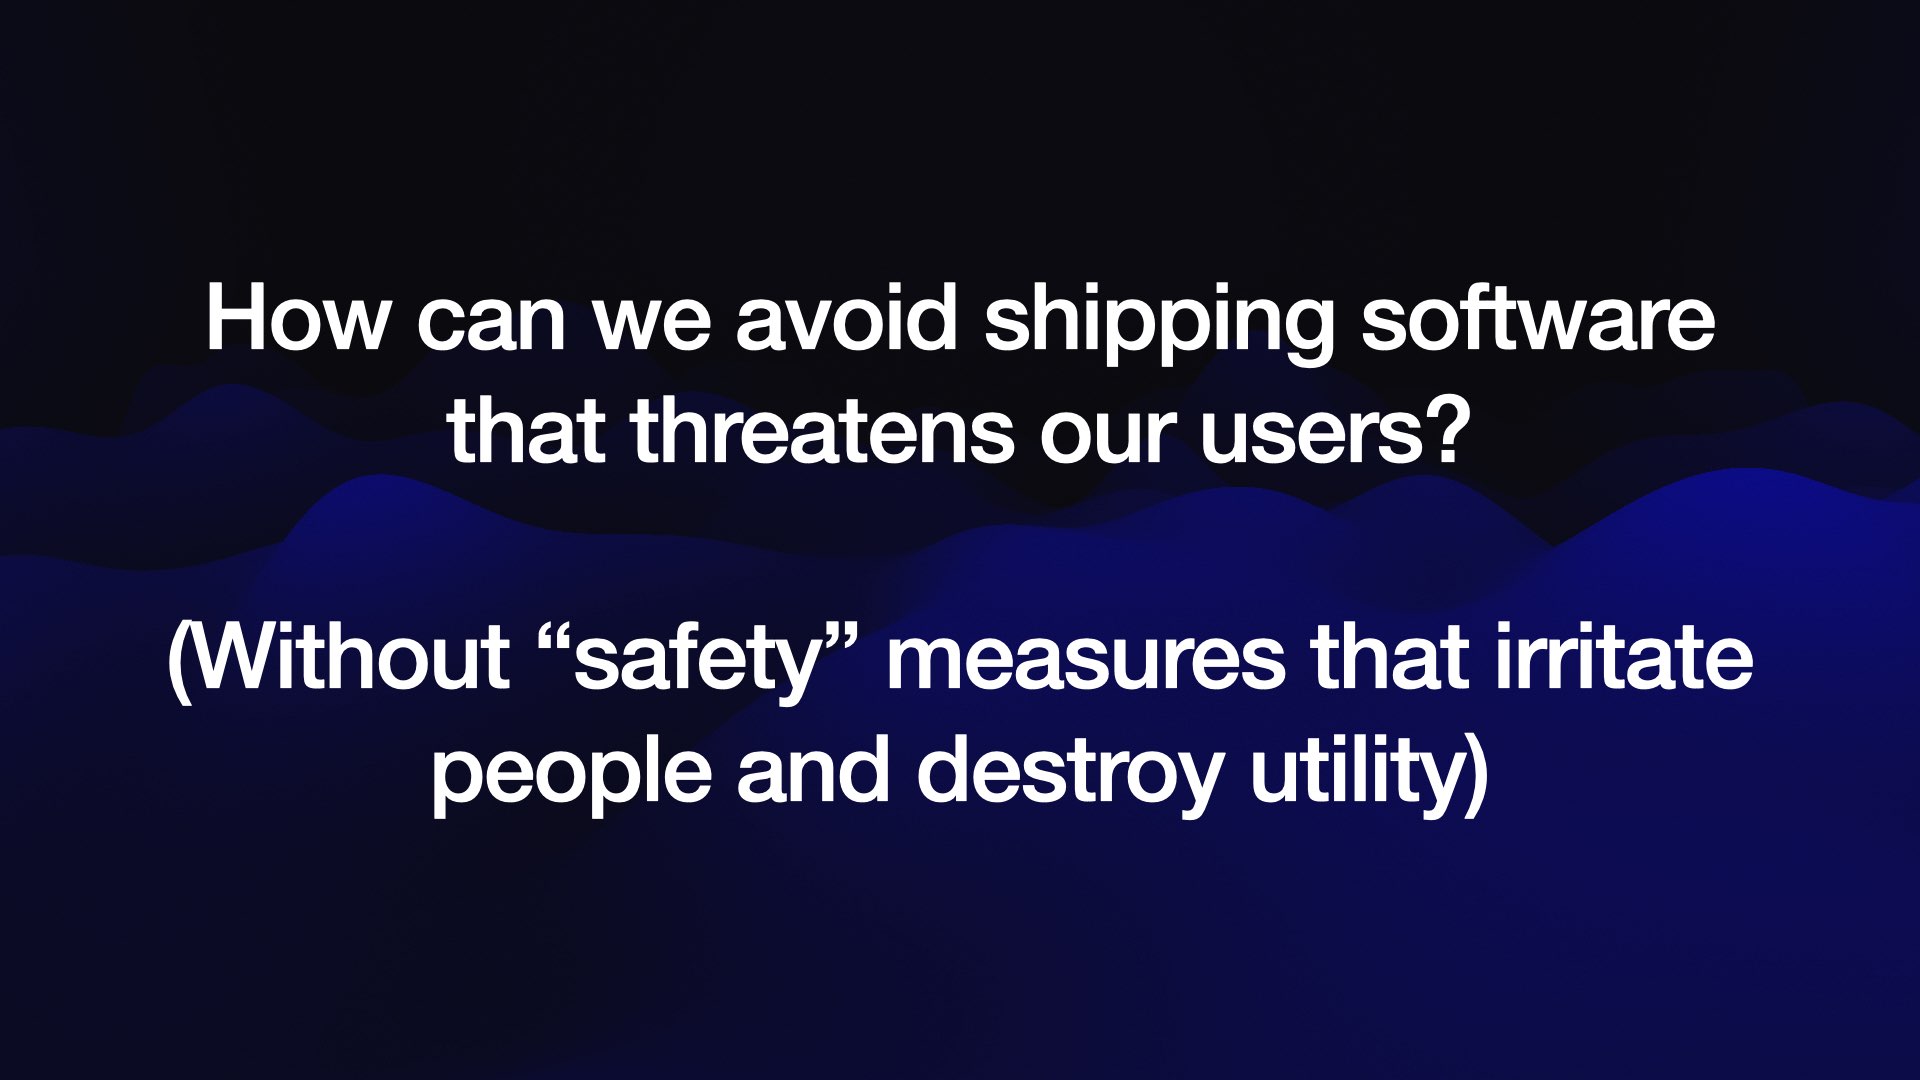 (Without “safety” measures that irritate people and destroy utility)